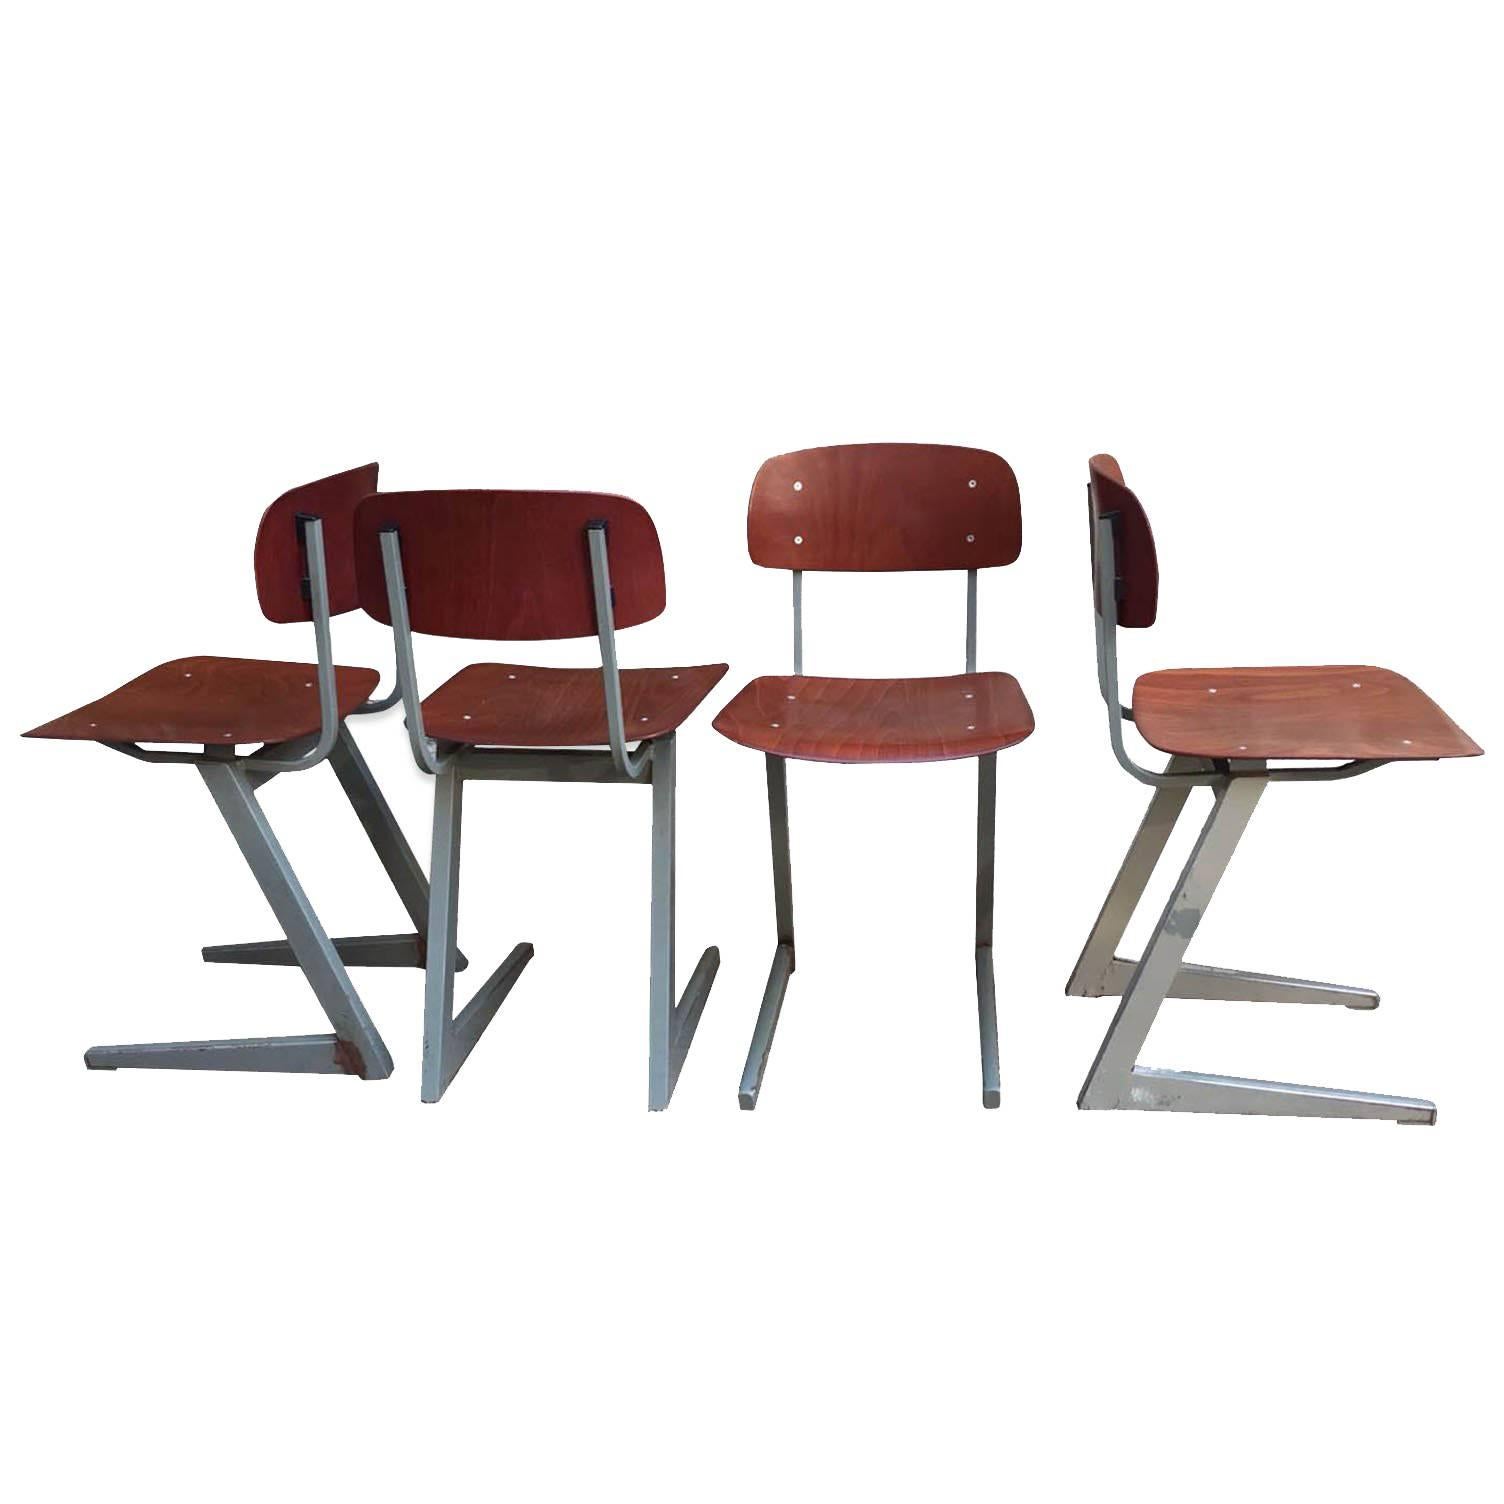 Mid-20th Century Set of Six Angular Pagwood Industrial Chairs For Sale